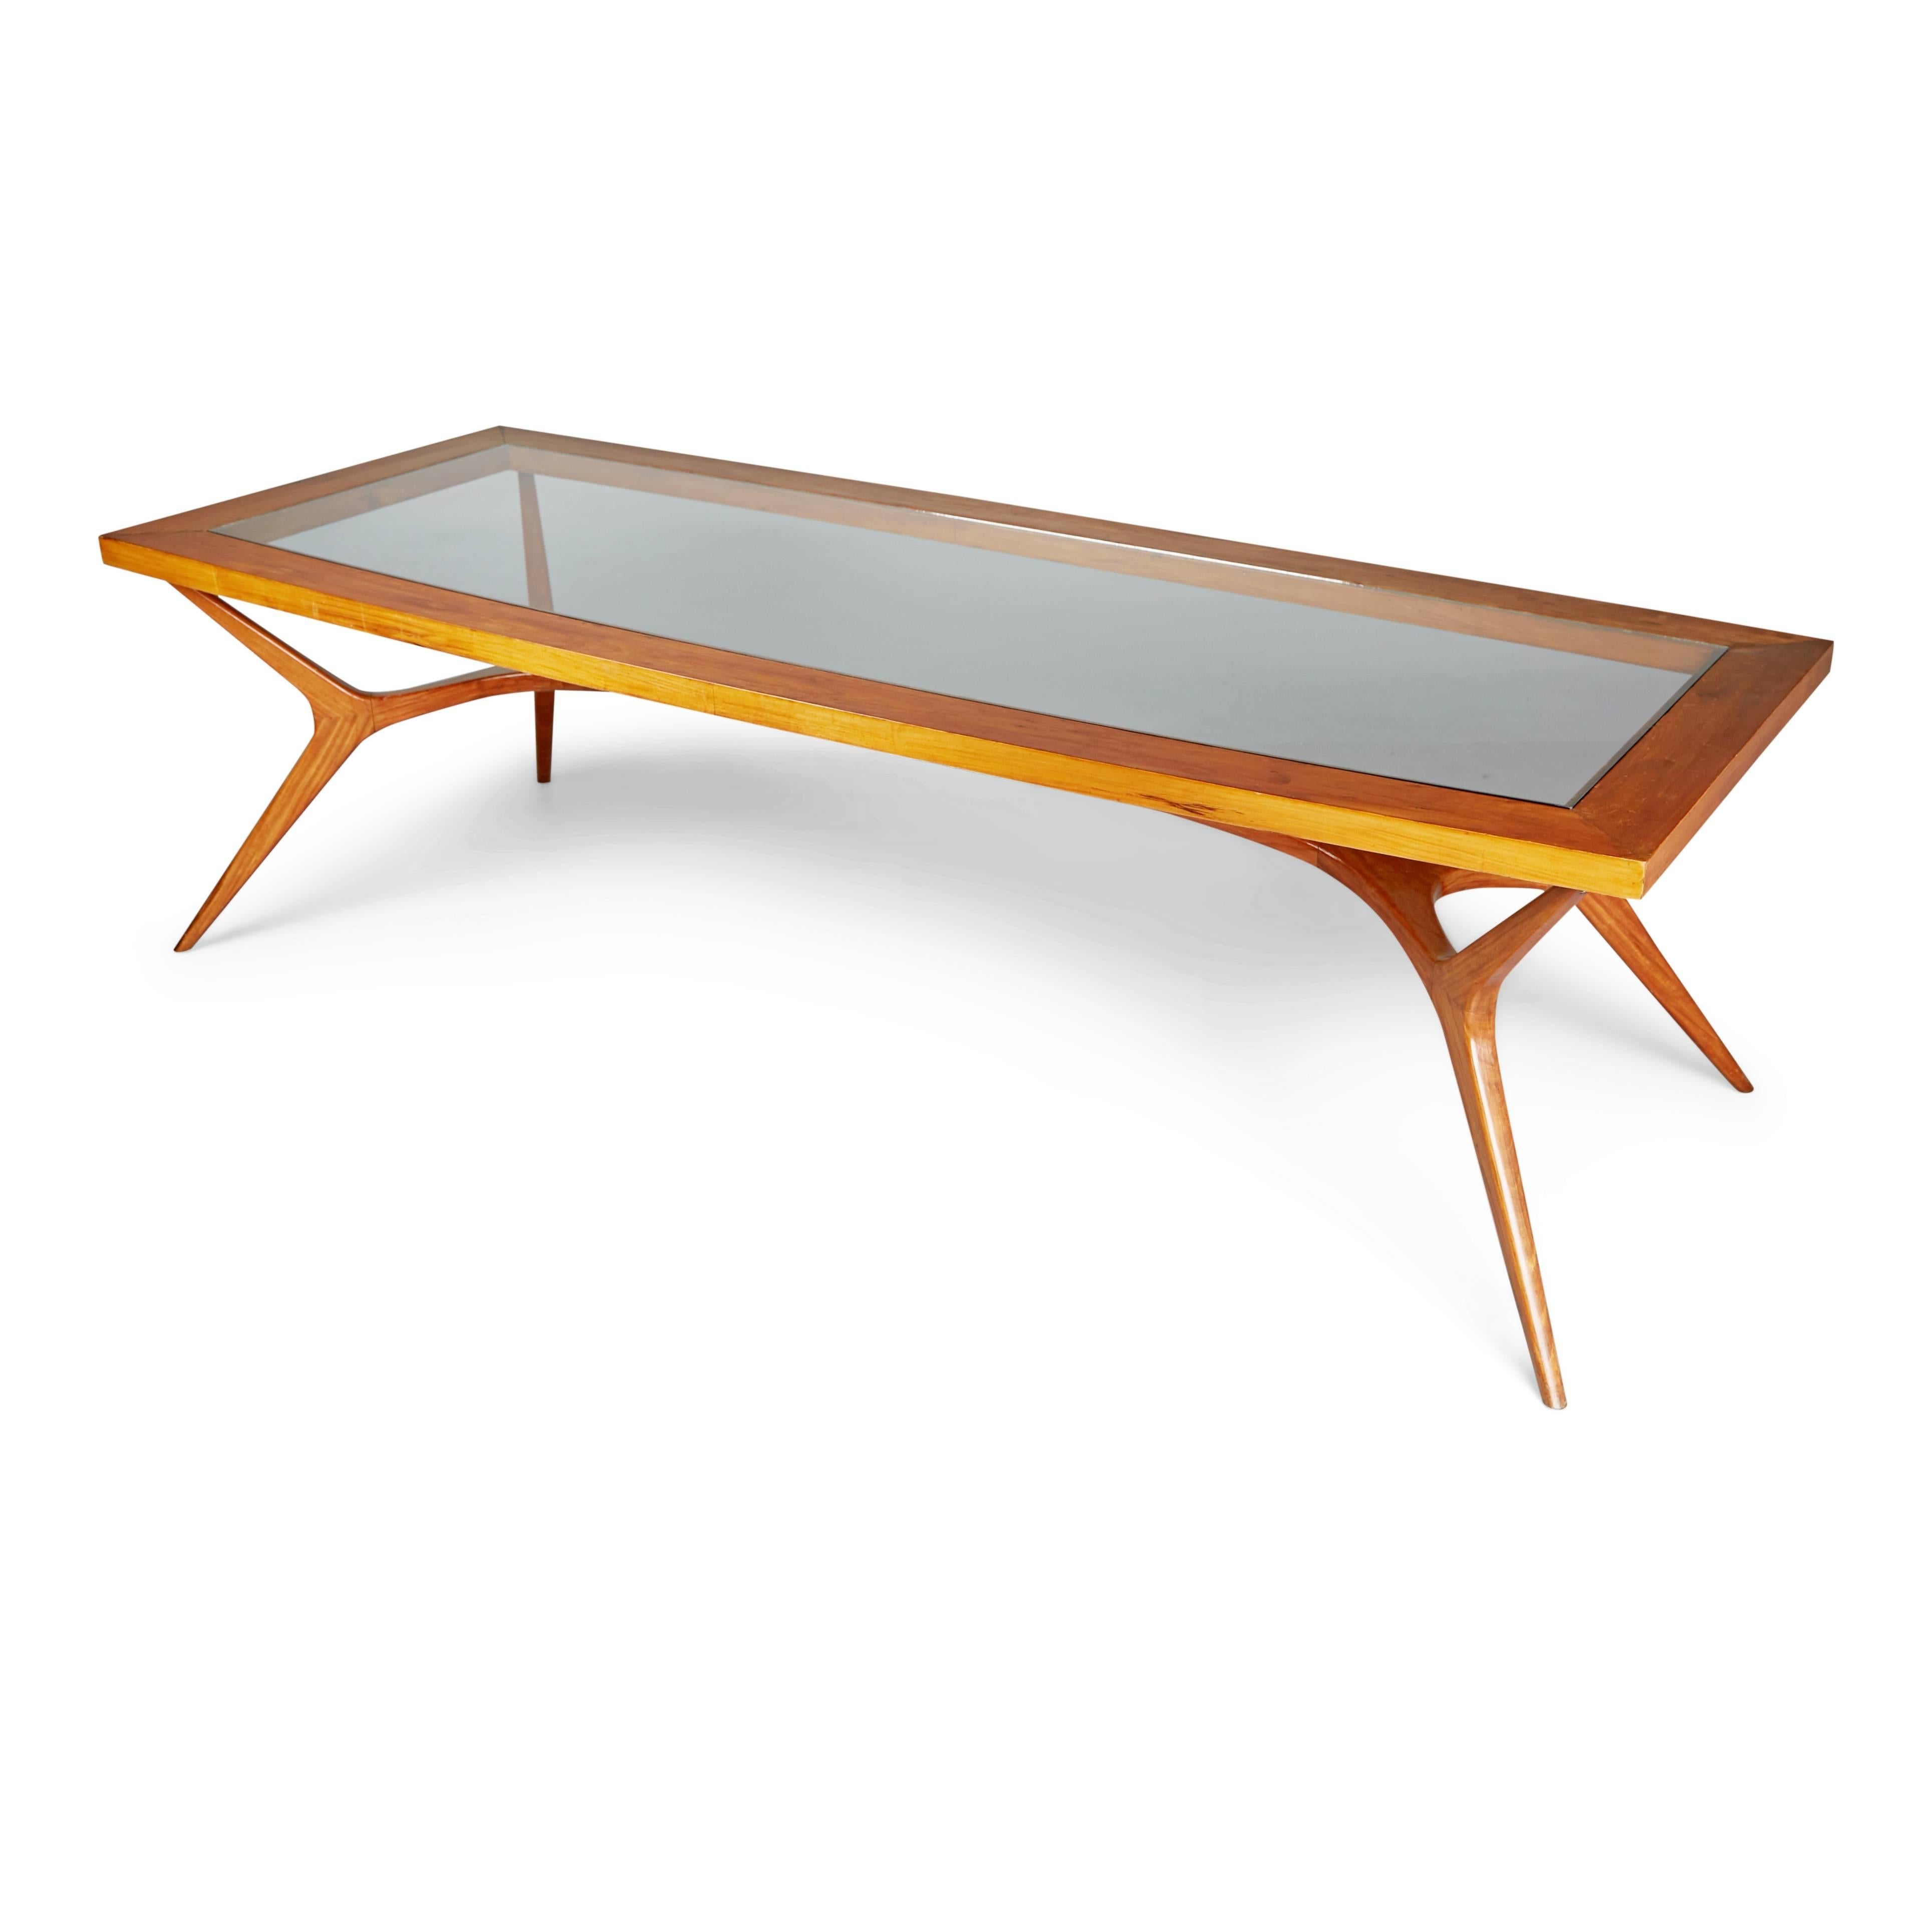 Mid-20th Century Sculptural Dining Table by Giuseppe Scapinelli, Rare Large Version, Brazil 1950s